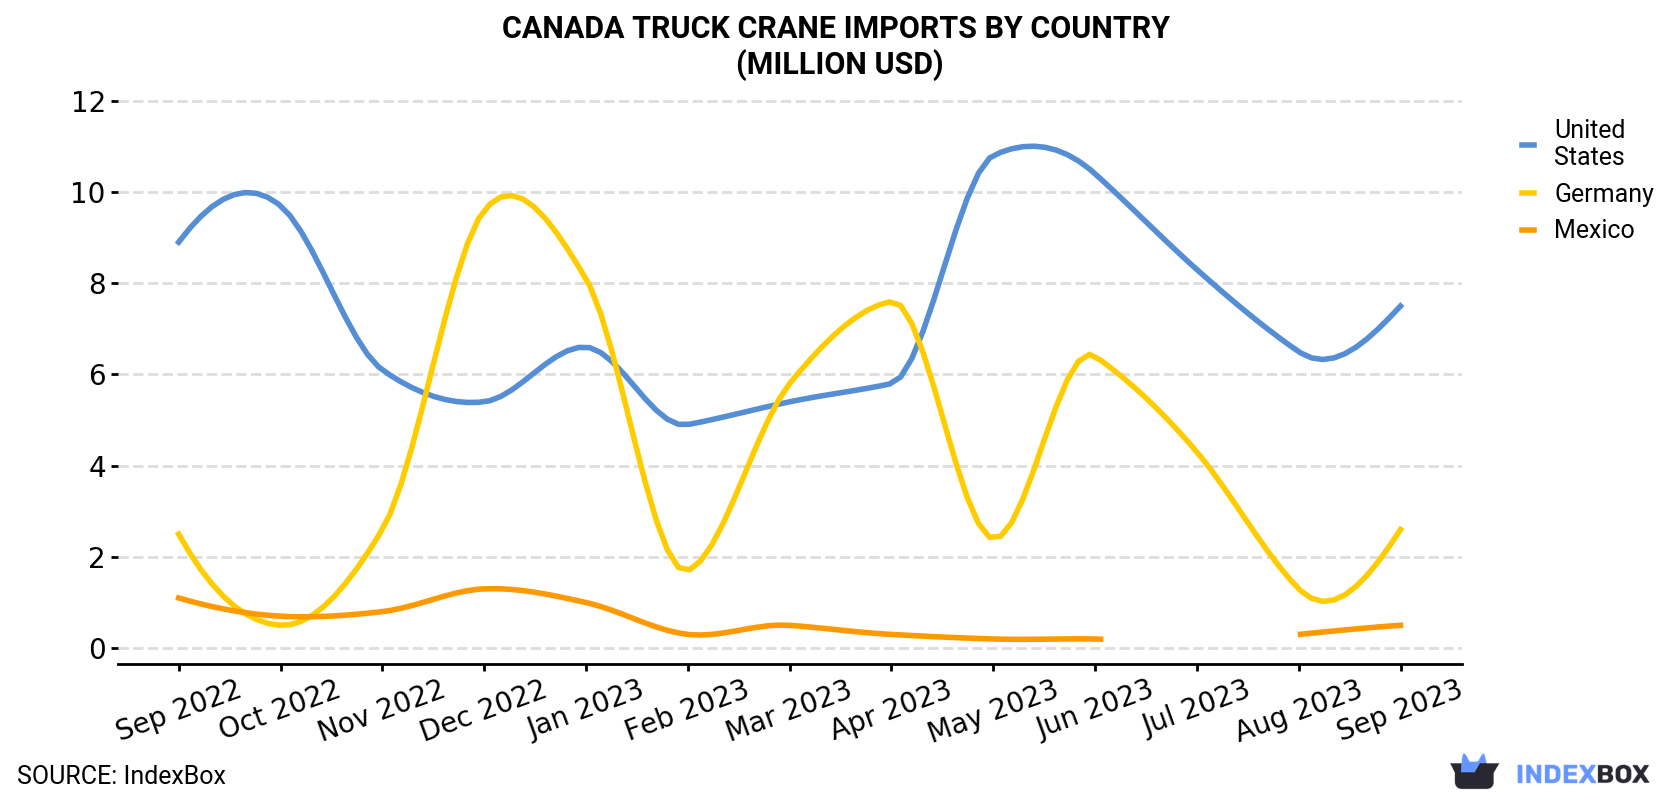 Canada Truck Crane Imports By Country (Million USD)